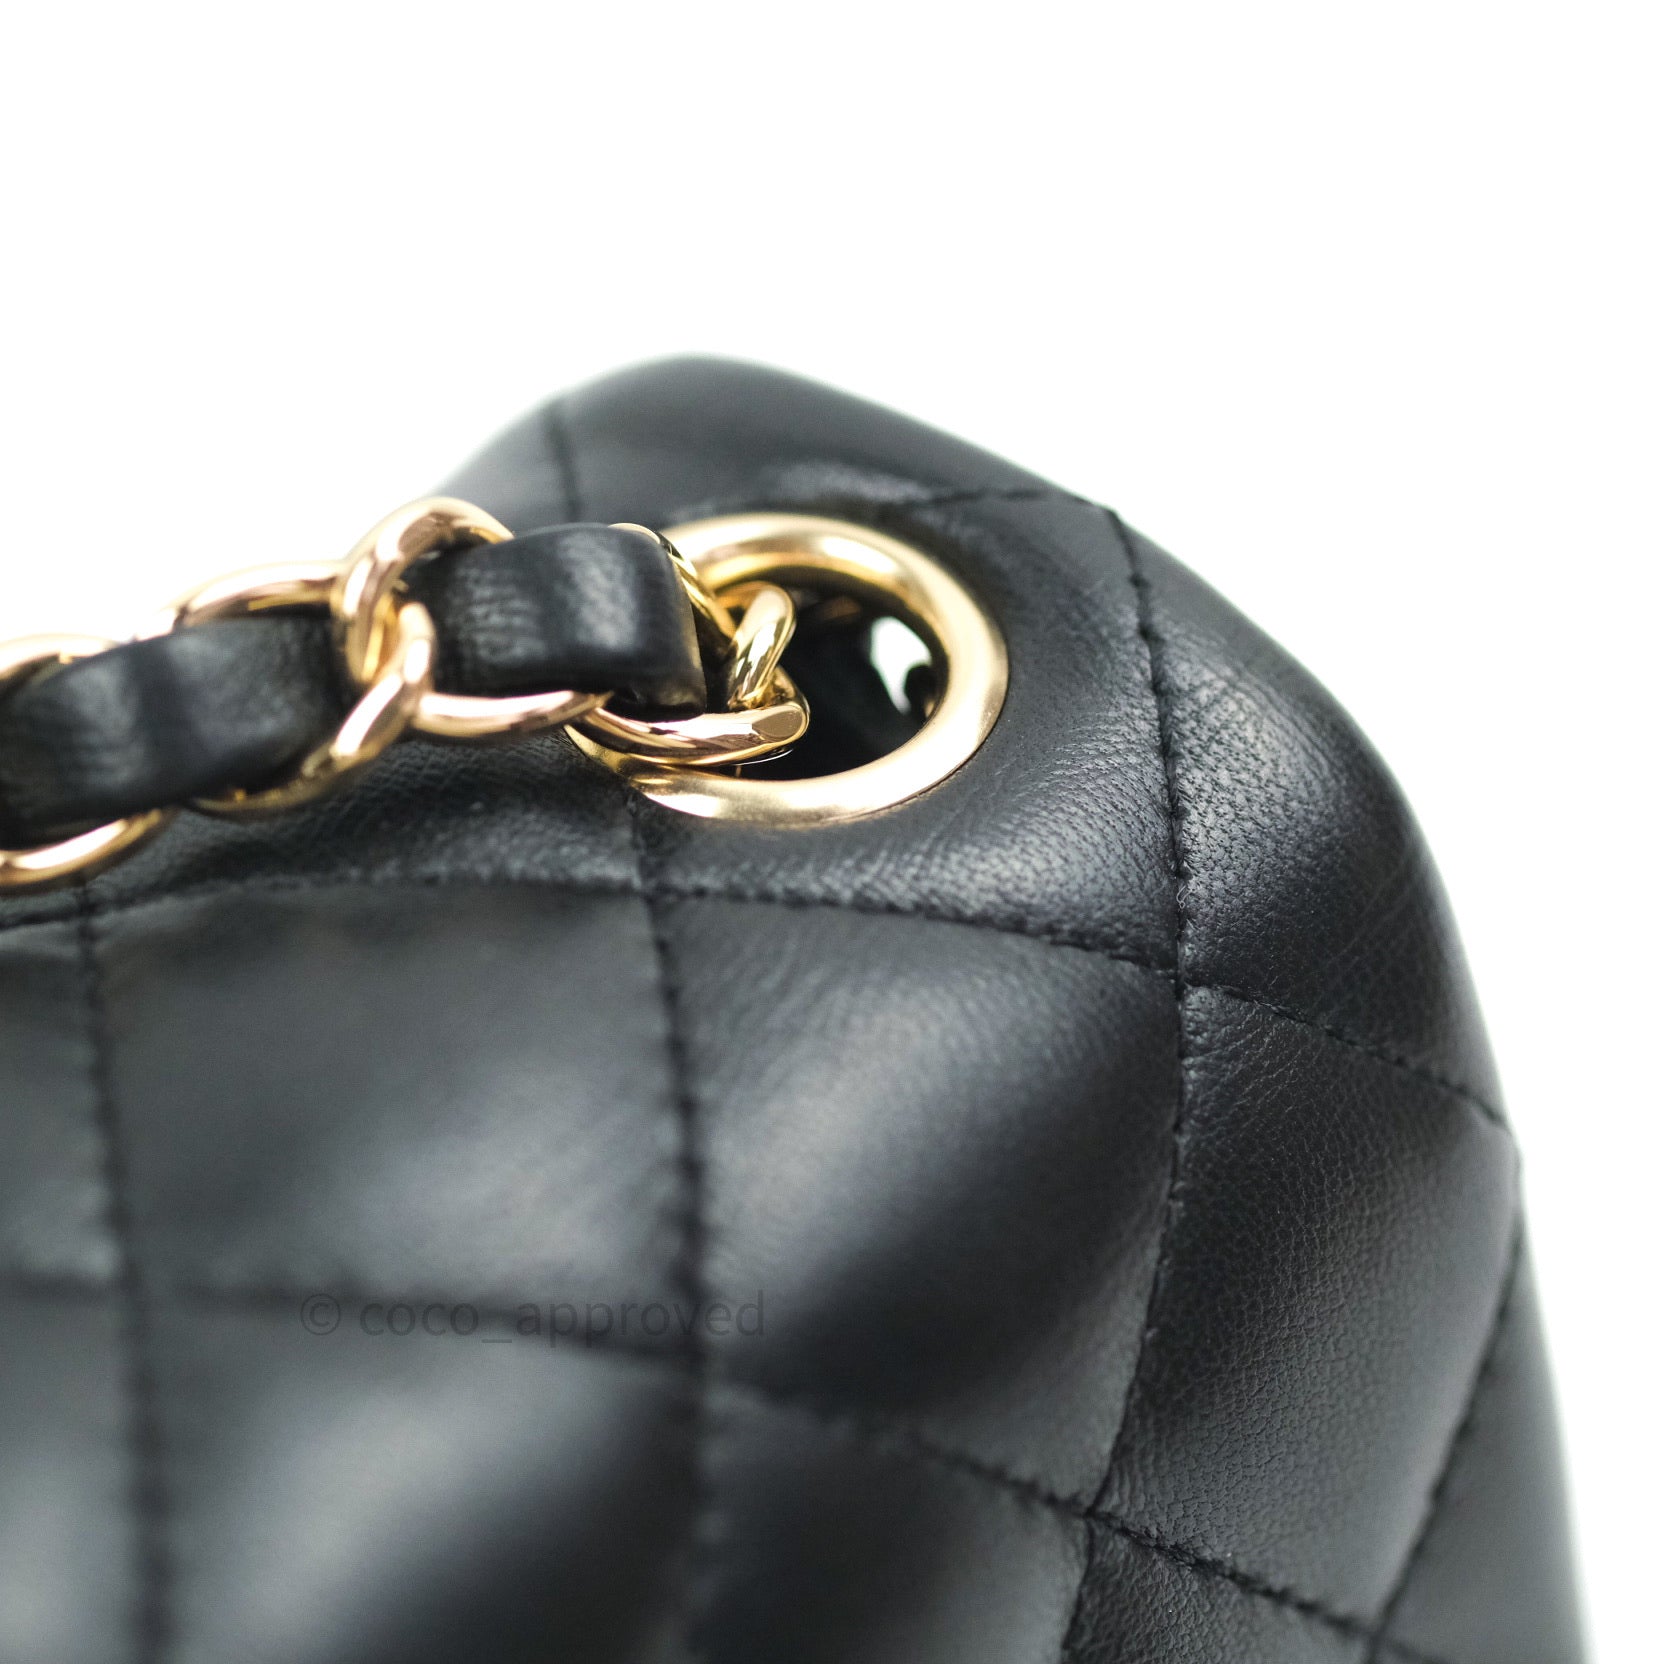 Chanel Mini Flap Bag With Pearl And Woven Chain CC Logo